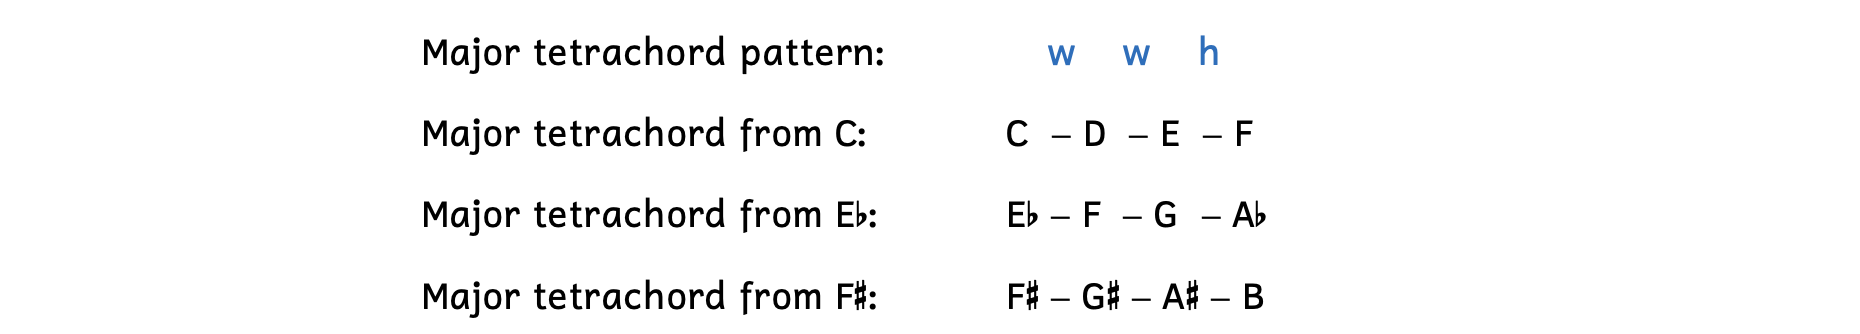 The major tetrachord pattern is whole step, whole step, half step. The major tetrachord beginning on C is C, D, E, F. The major tetrachord beginning on E-flat is E-flat, F, G, A-flat. The major tetrachord beginning on F-sharp is F-sharp, G-sharp, A-sharp, B.